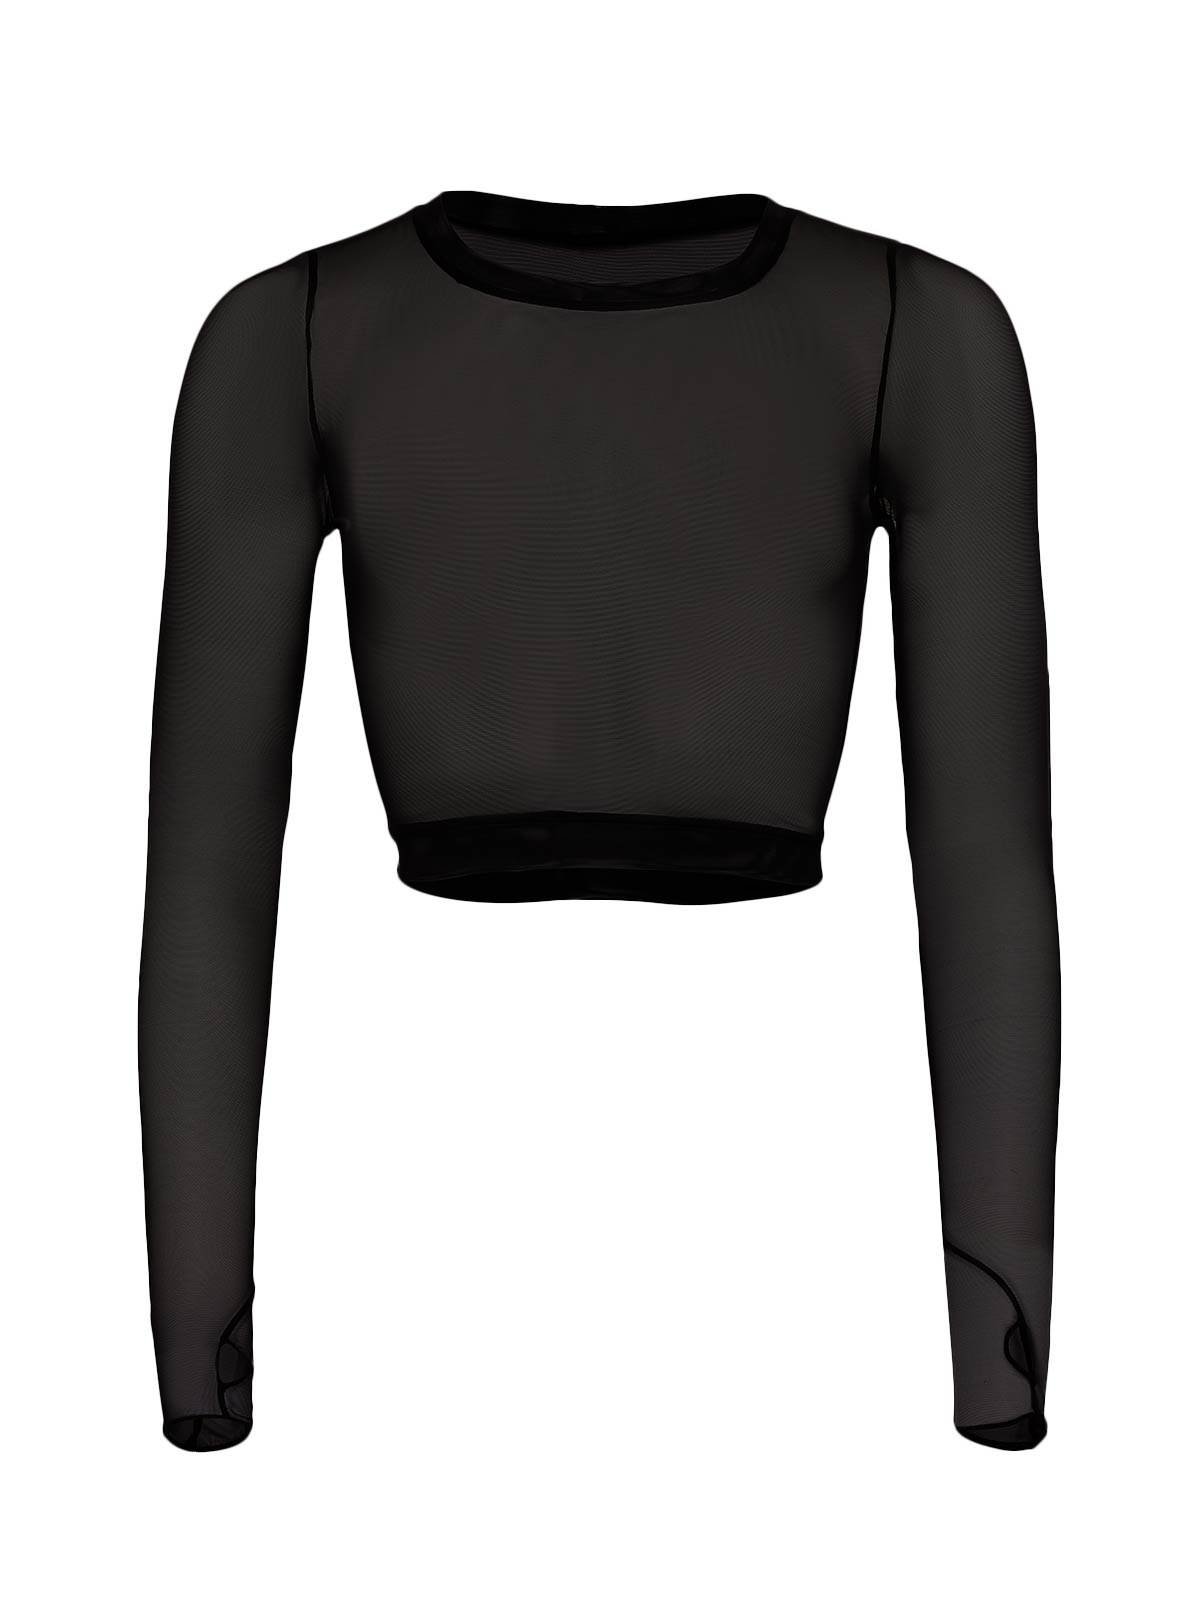 Black Mesh Long Sleeve Crop Top | Womens | X-Small (Available in S, M) | Lulus Exclusive | Long Sleeve Tops | Tops | Stretchy Fabric